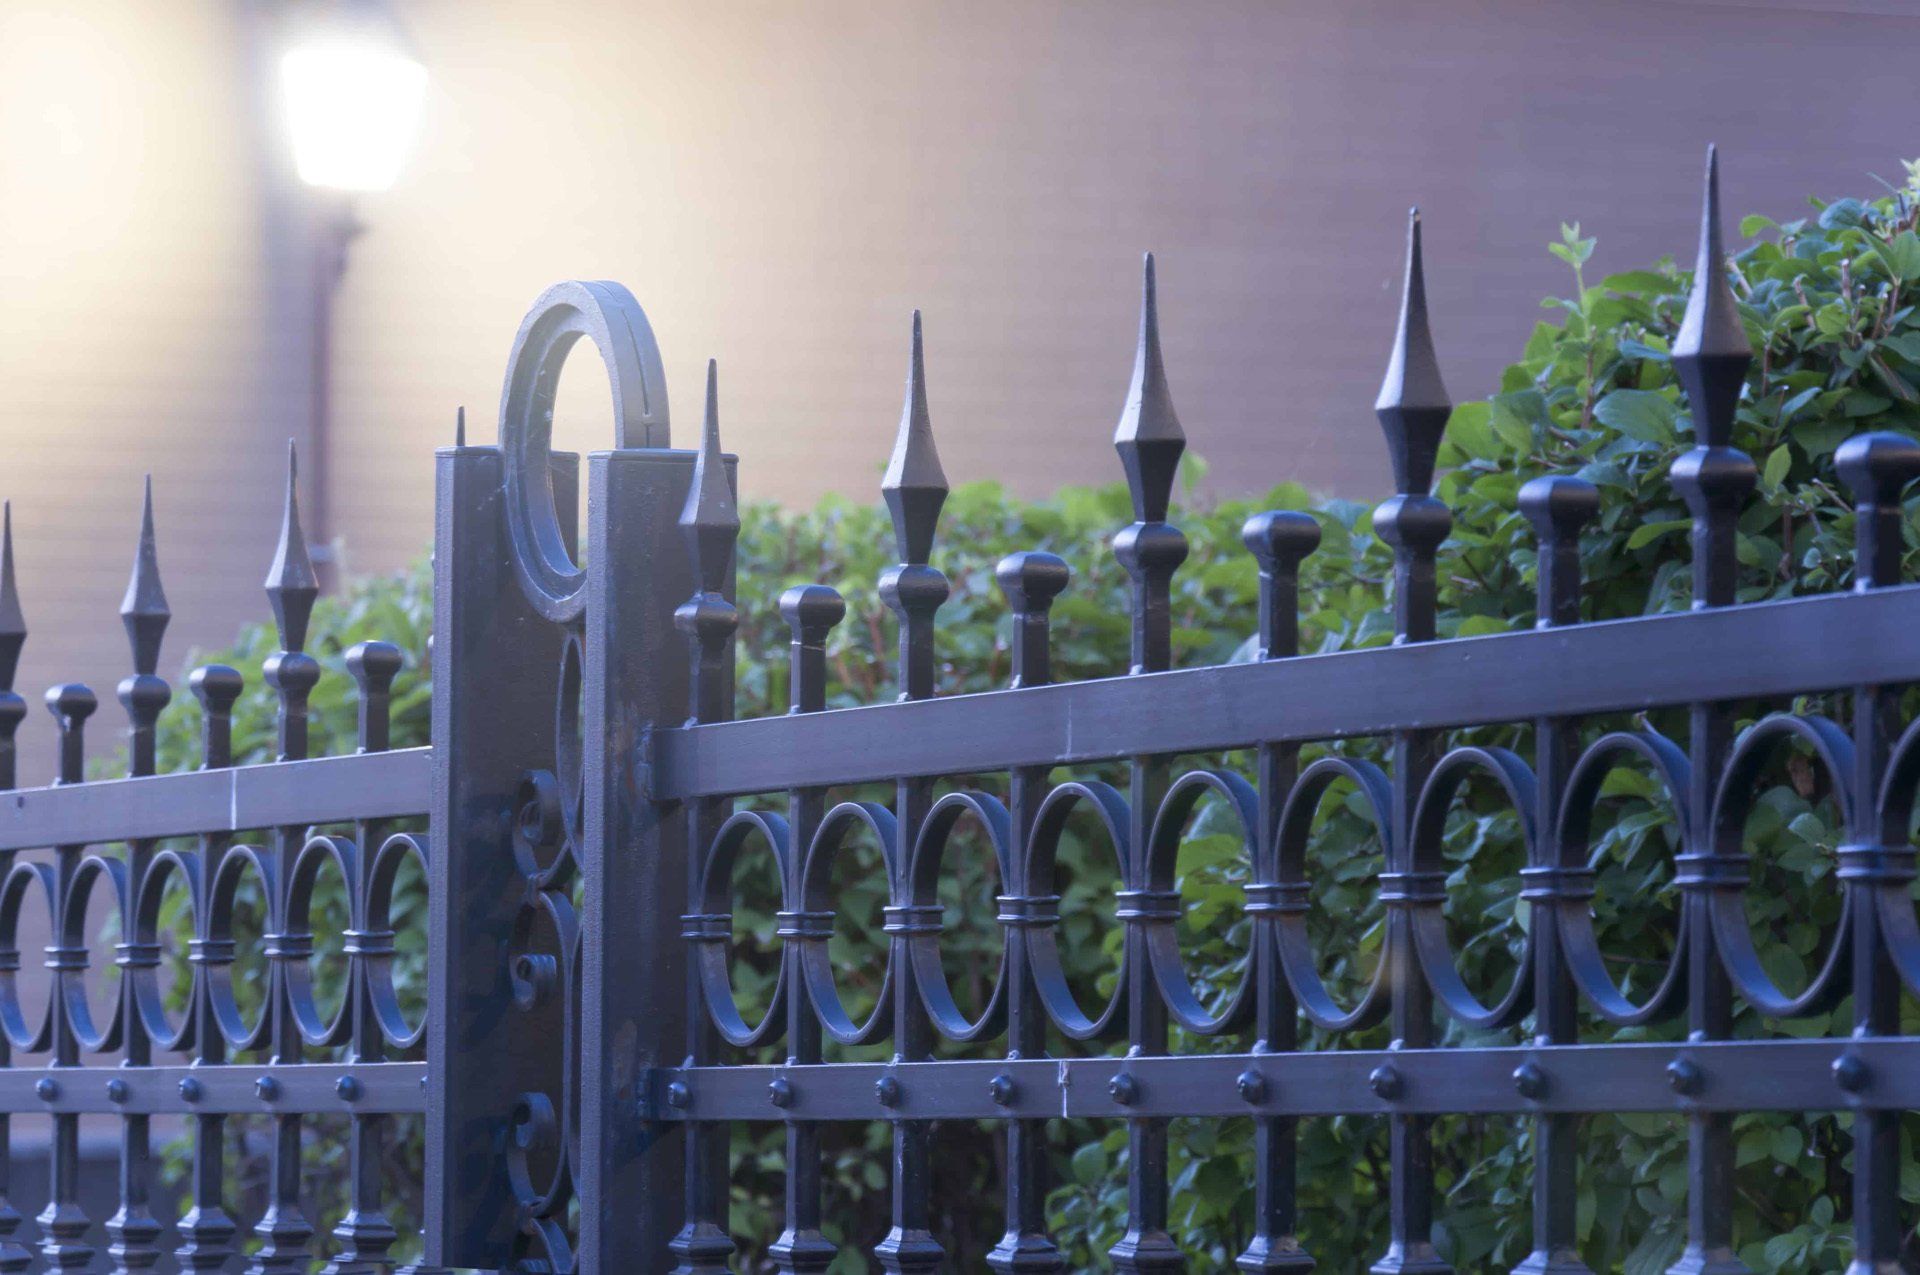 Wrought iron is a secure fencing solution